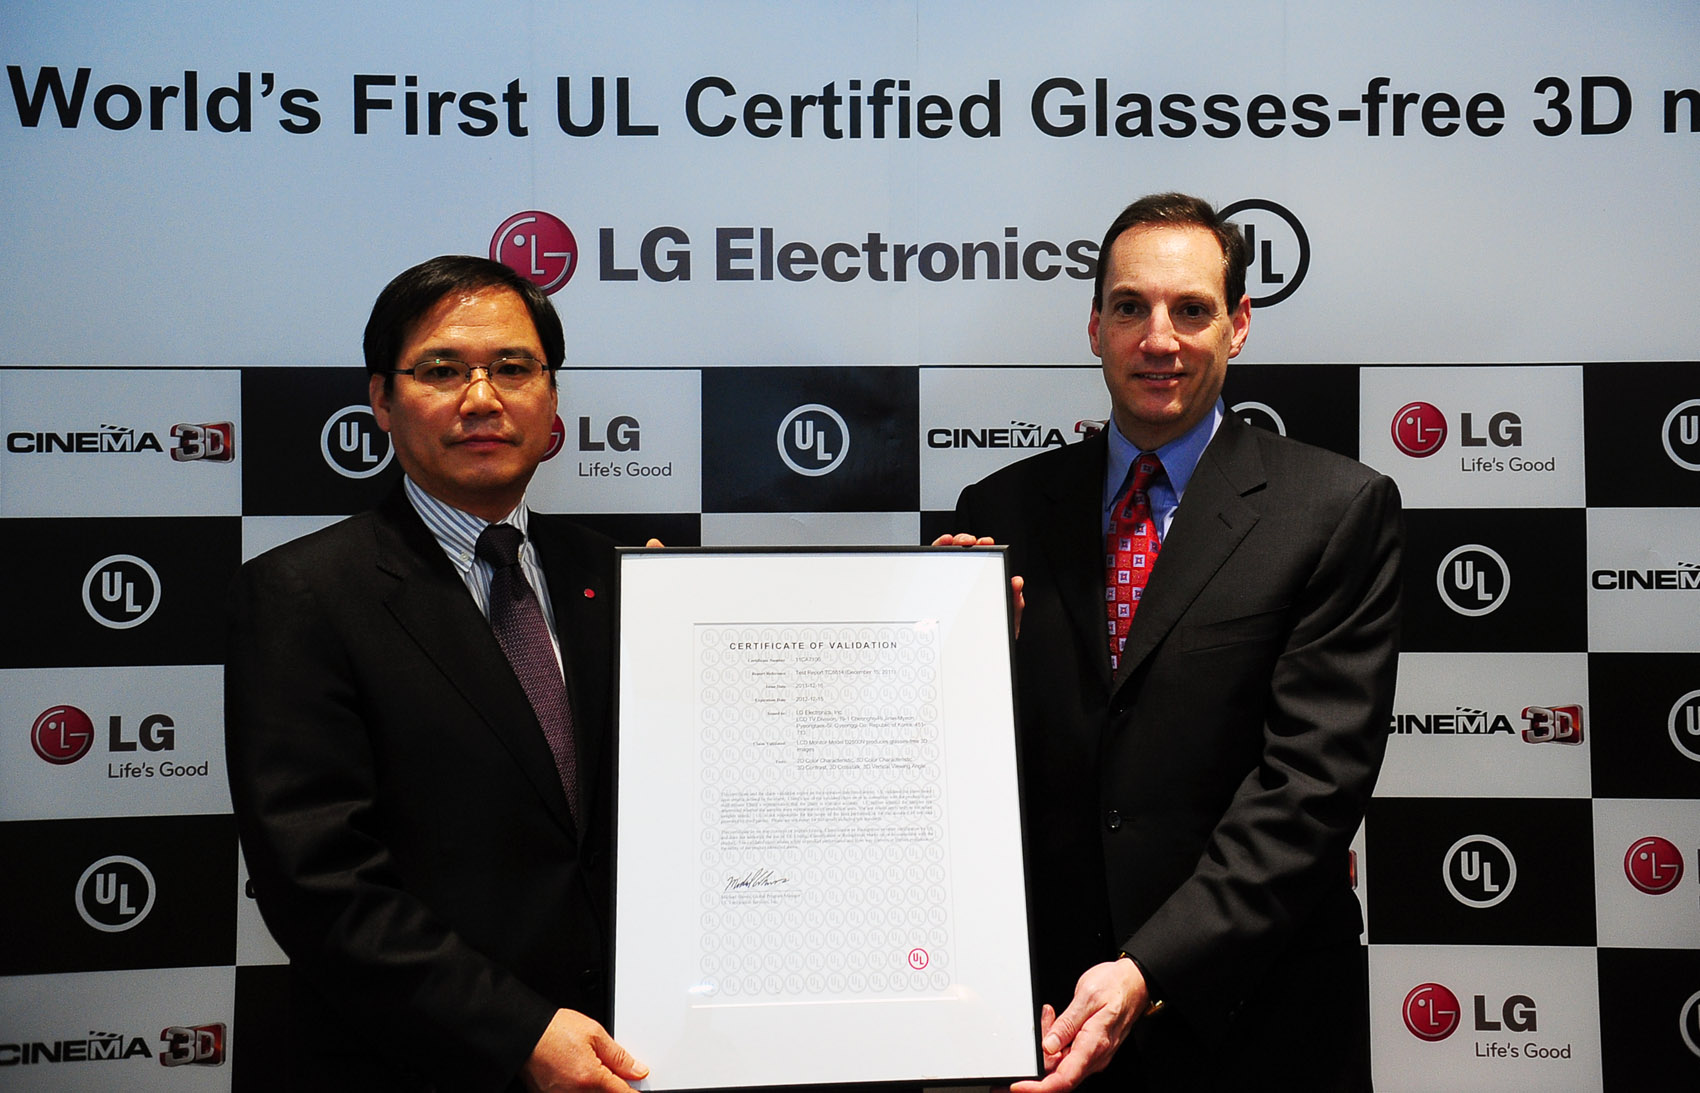 LG and UL representatives hold up the UL certification letter for LG’s Glasses-free CINEMA 3D monitor